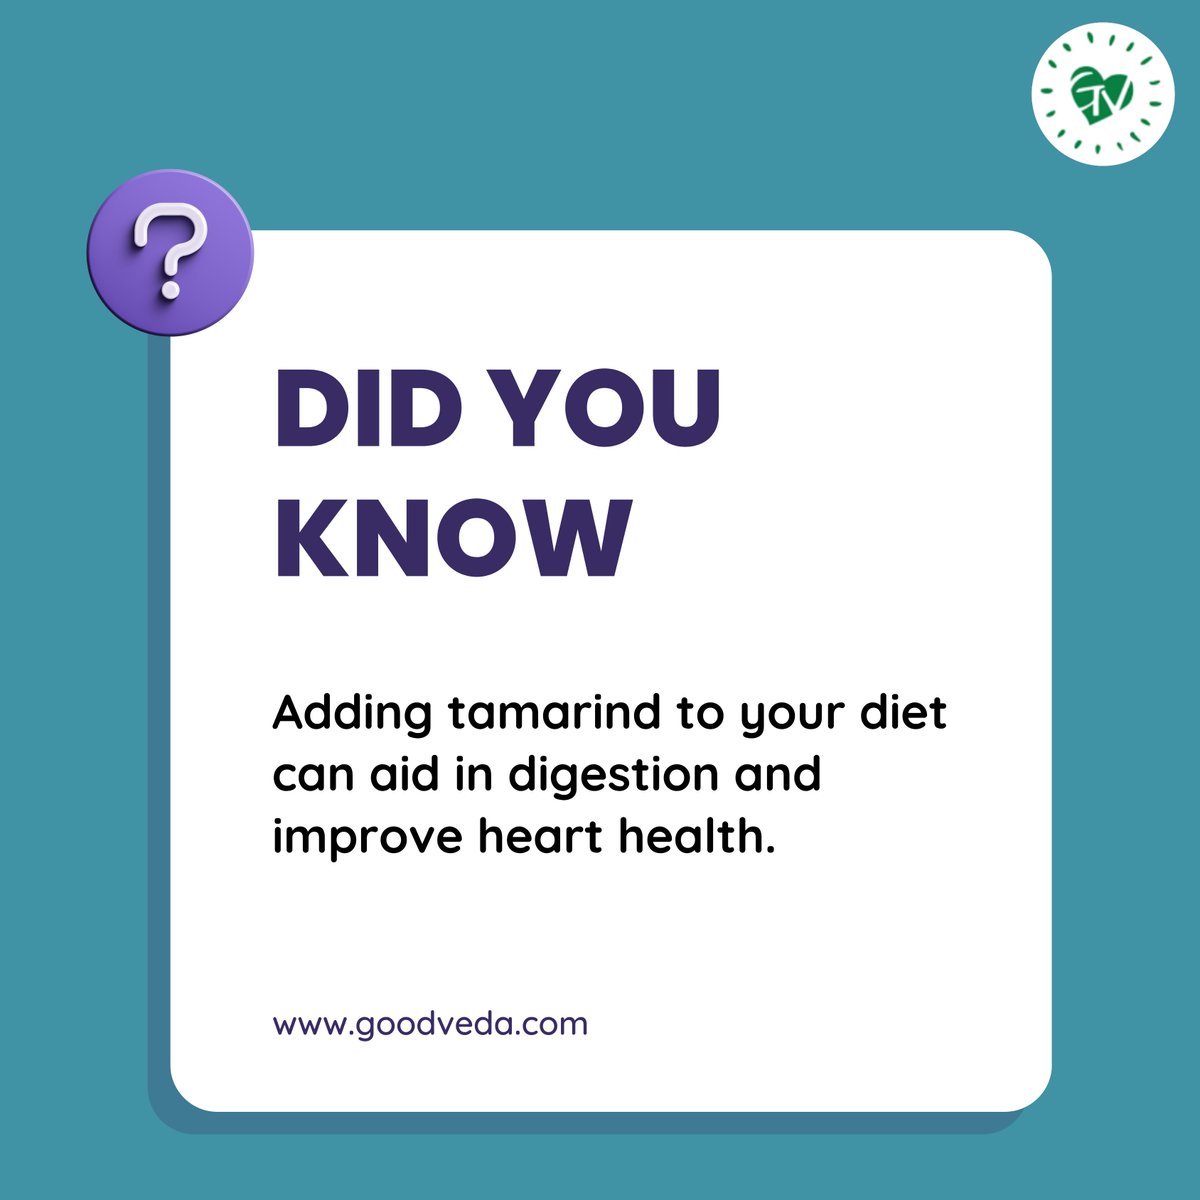 Did you know?

#didyouknow #factsdaily #Diet #HealthyDiet